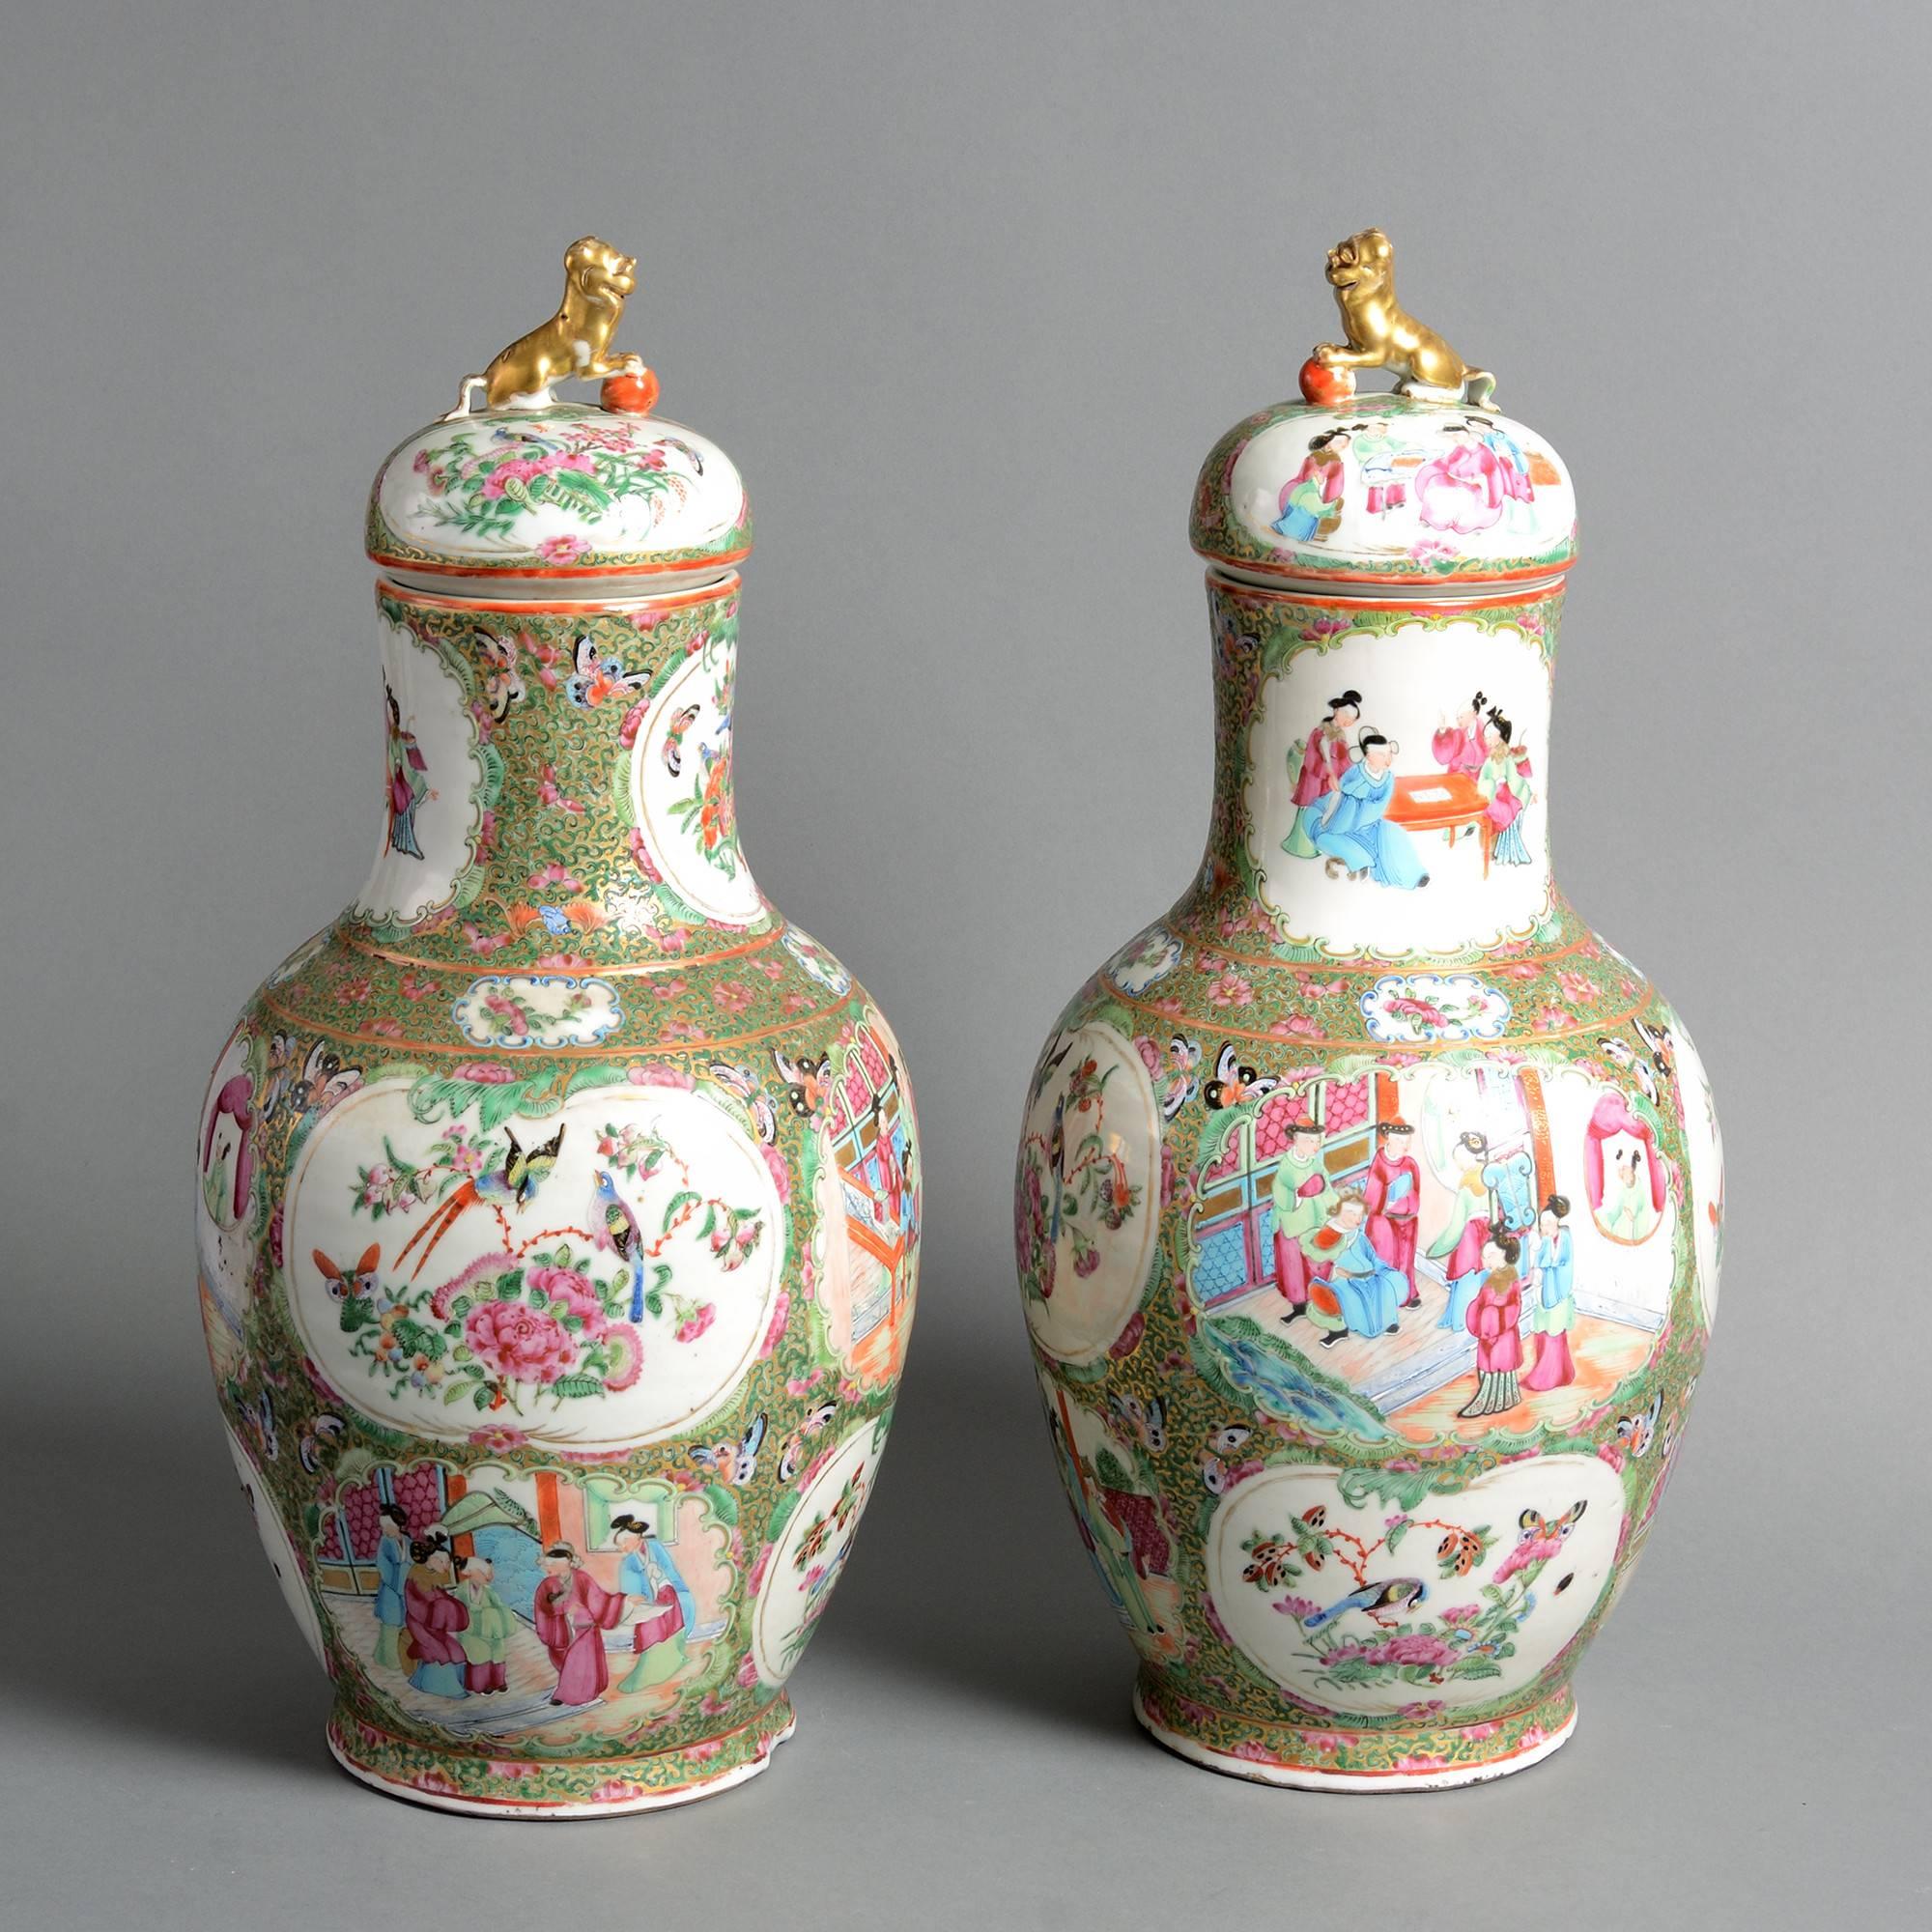 A fine pair of late 19th century famille verte porcelain vases, decorated throughout with figurative and ornithological scenes, the covers surmounted with seated gilded lions. 

Qing dynasty. 

Guangxu period (1875-1908).